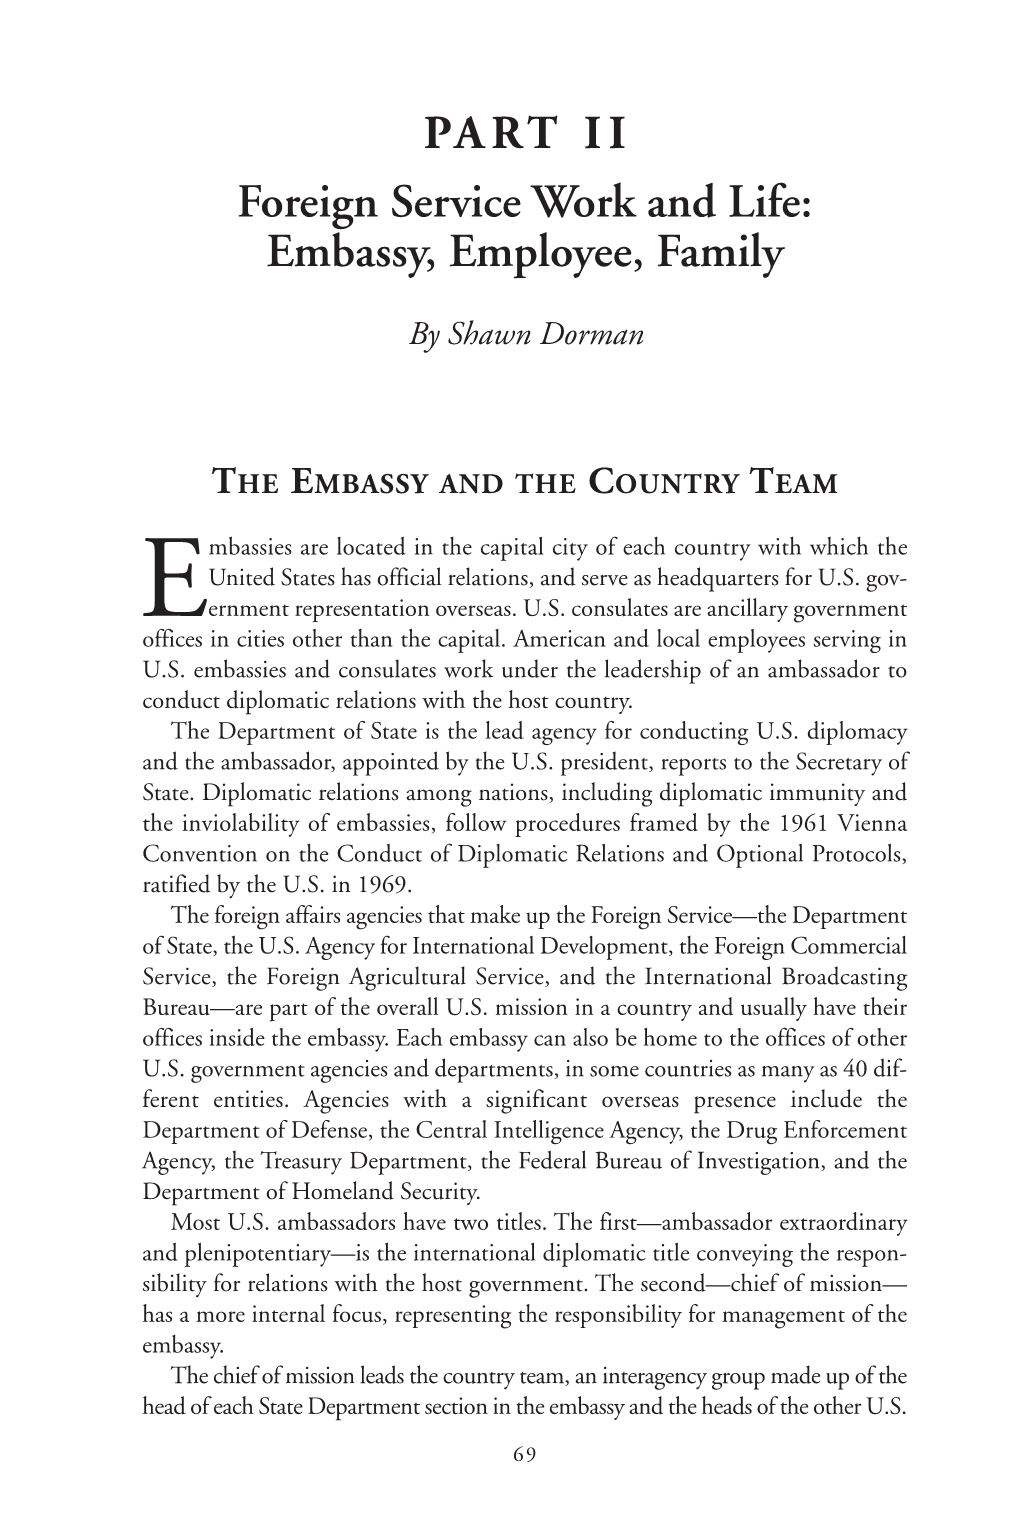 The Country Team and Local Staff Role | Excerpt from Inside a U.S. Embassy